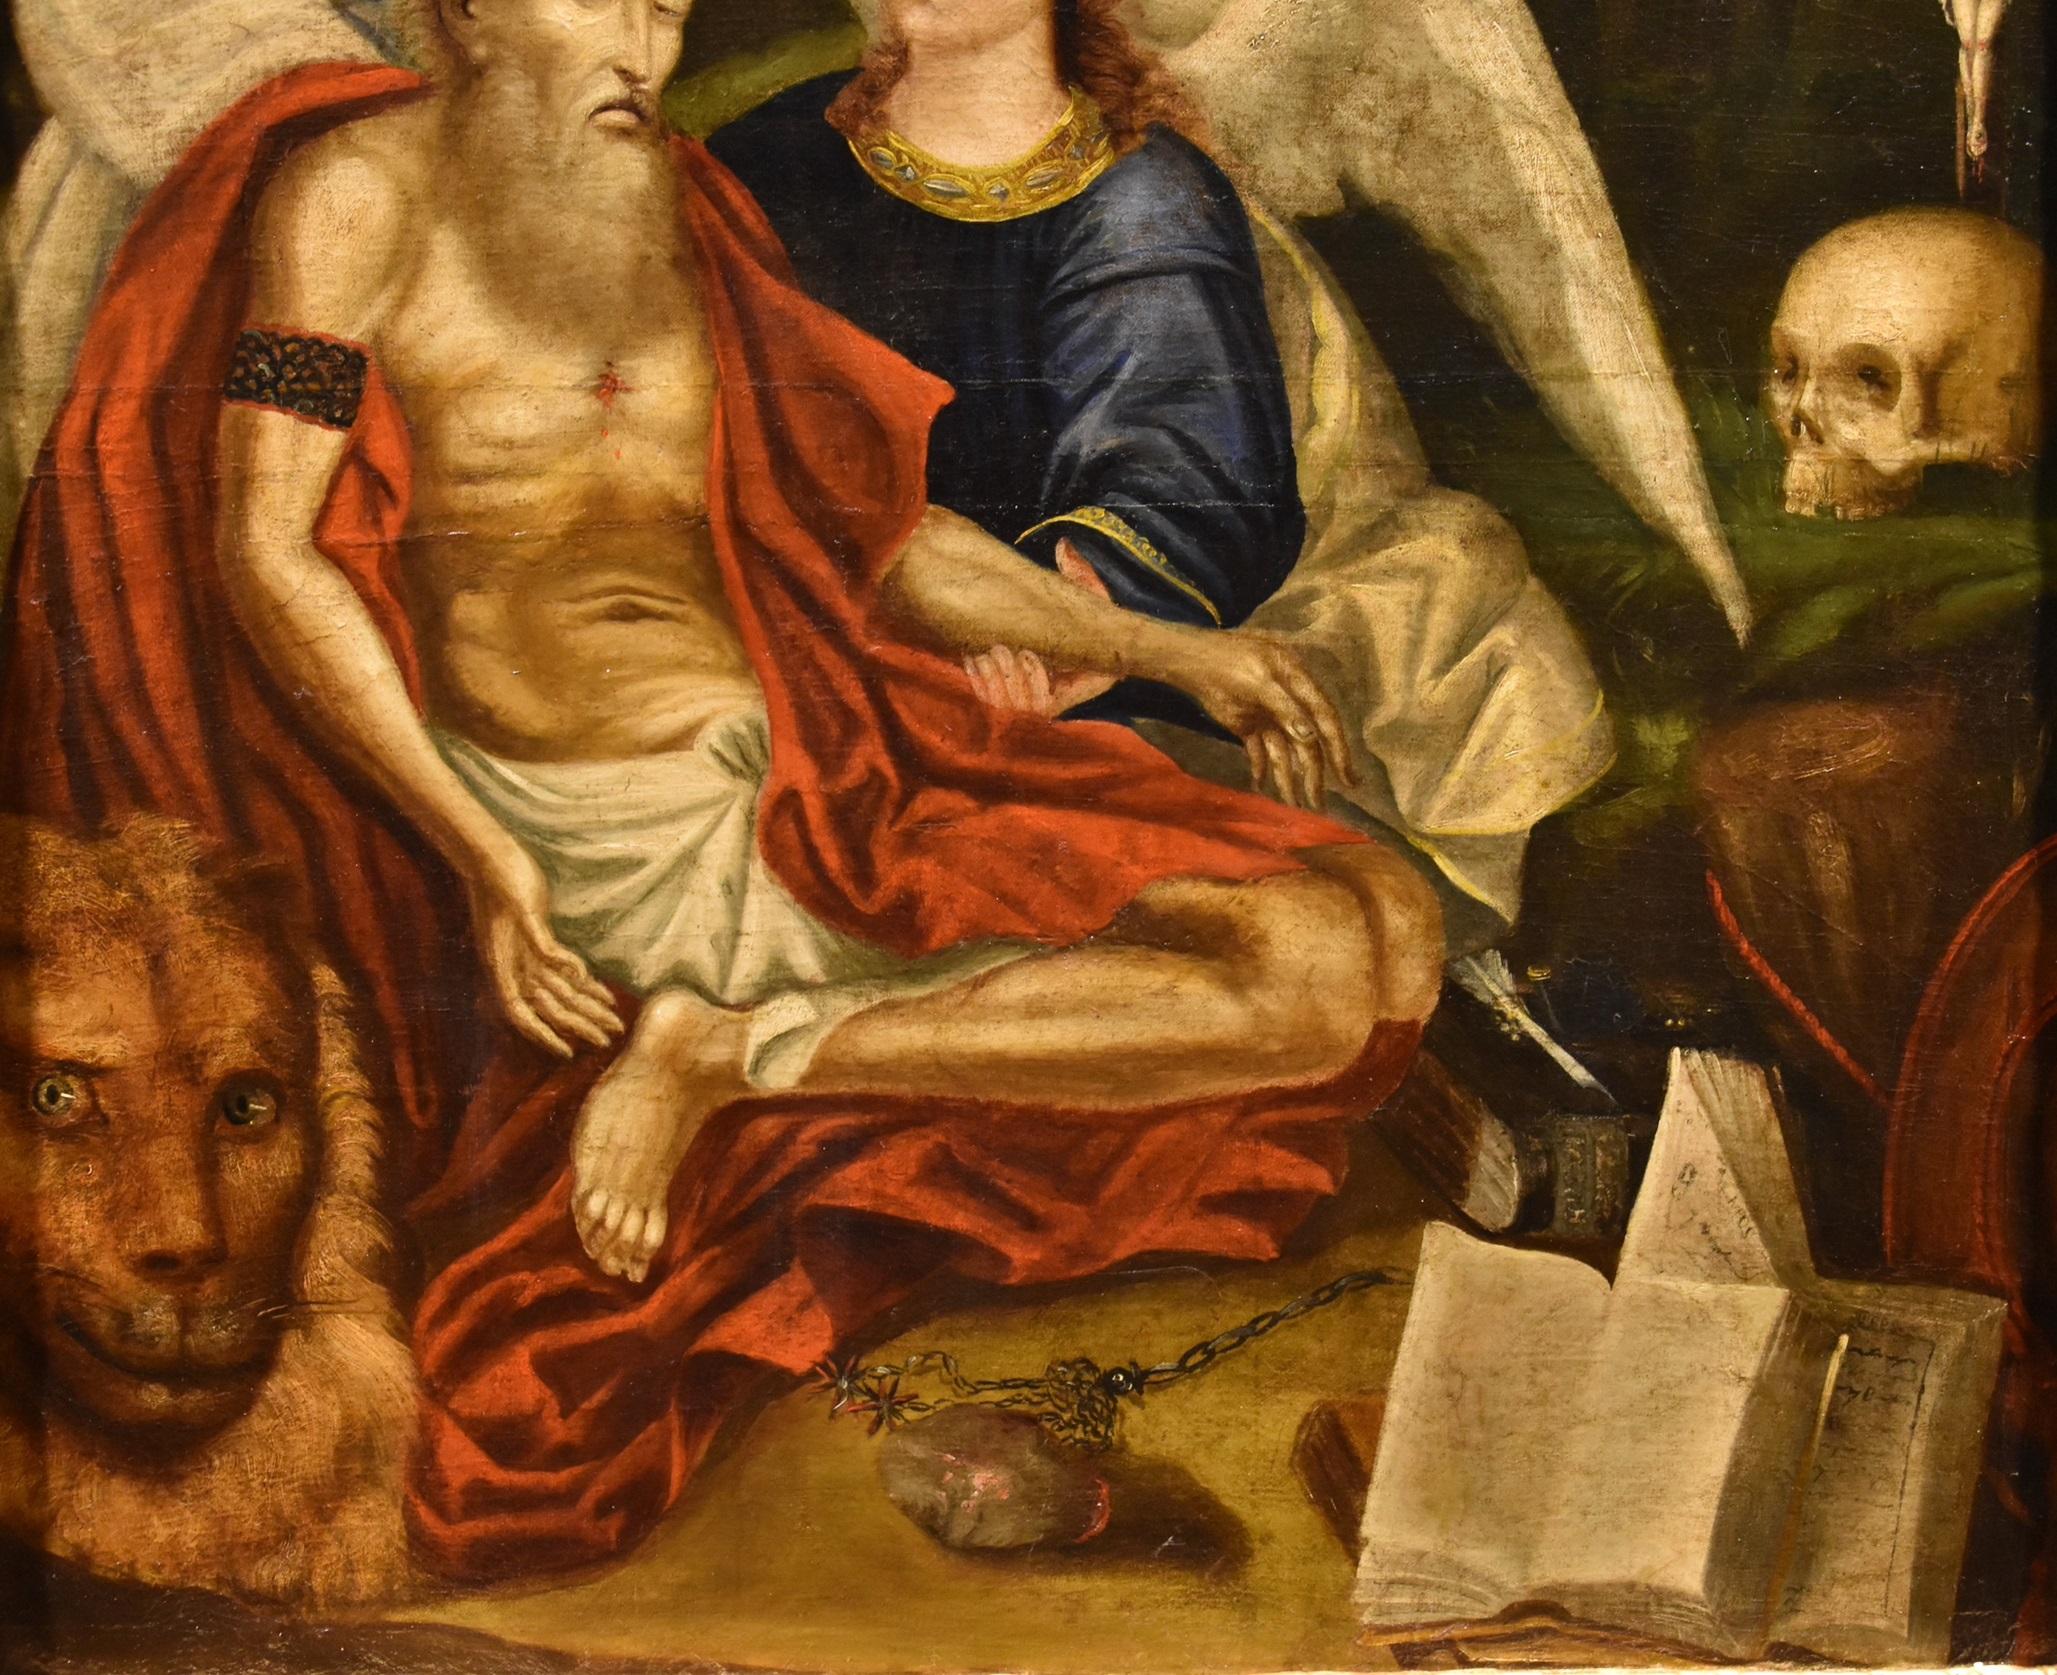 Saint Jerome supported by two angels
Early 17th century Venetian painter

Oil on canvas
86 x 67 cm. - In frame 103 x 84 cm.

The proposed painting offers us an intense portrayal of Saint Jerome, Doctor of the Church who lived between the 4th and 5th